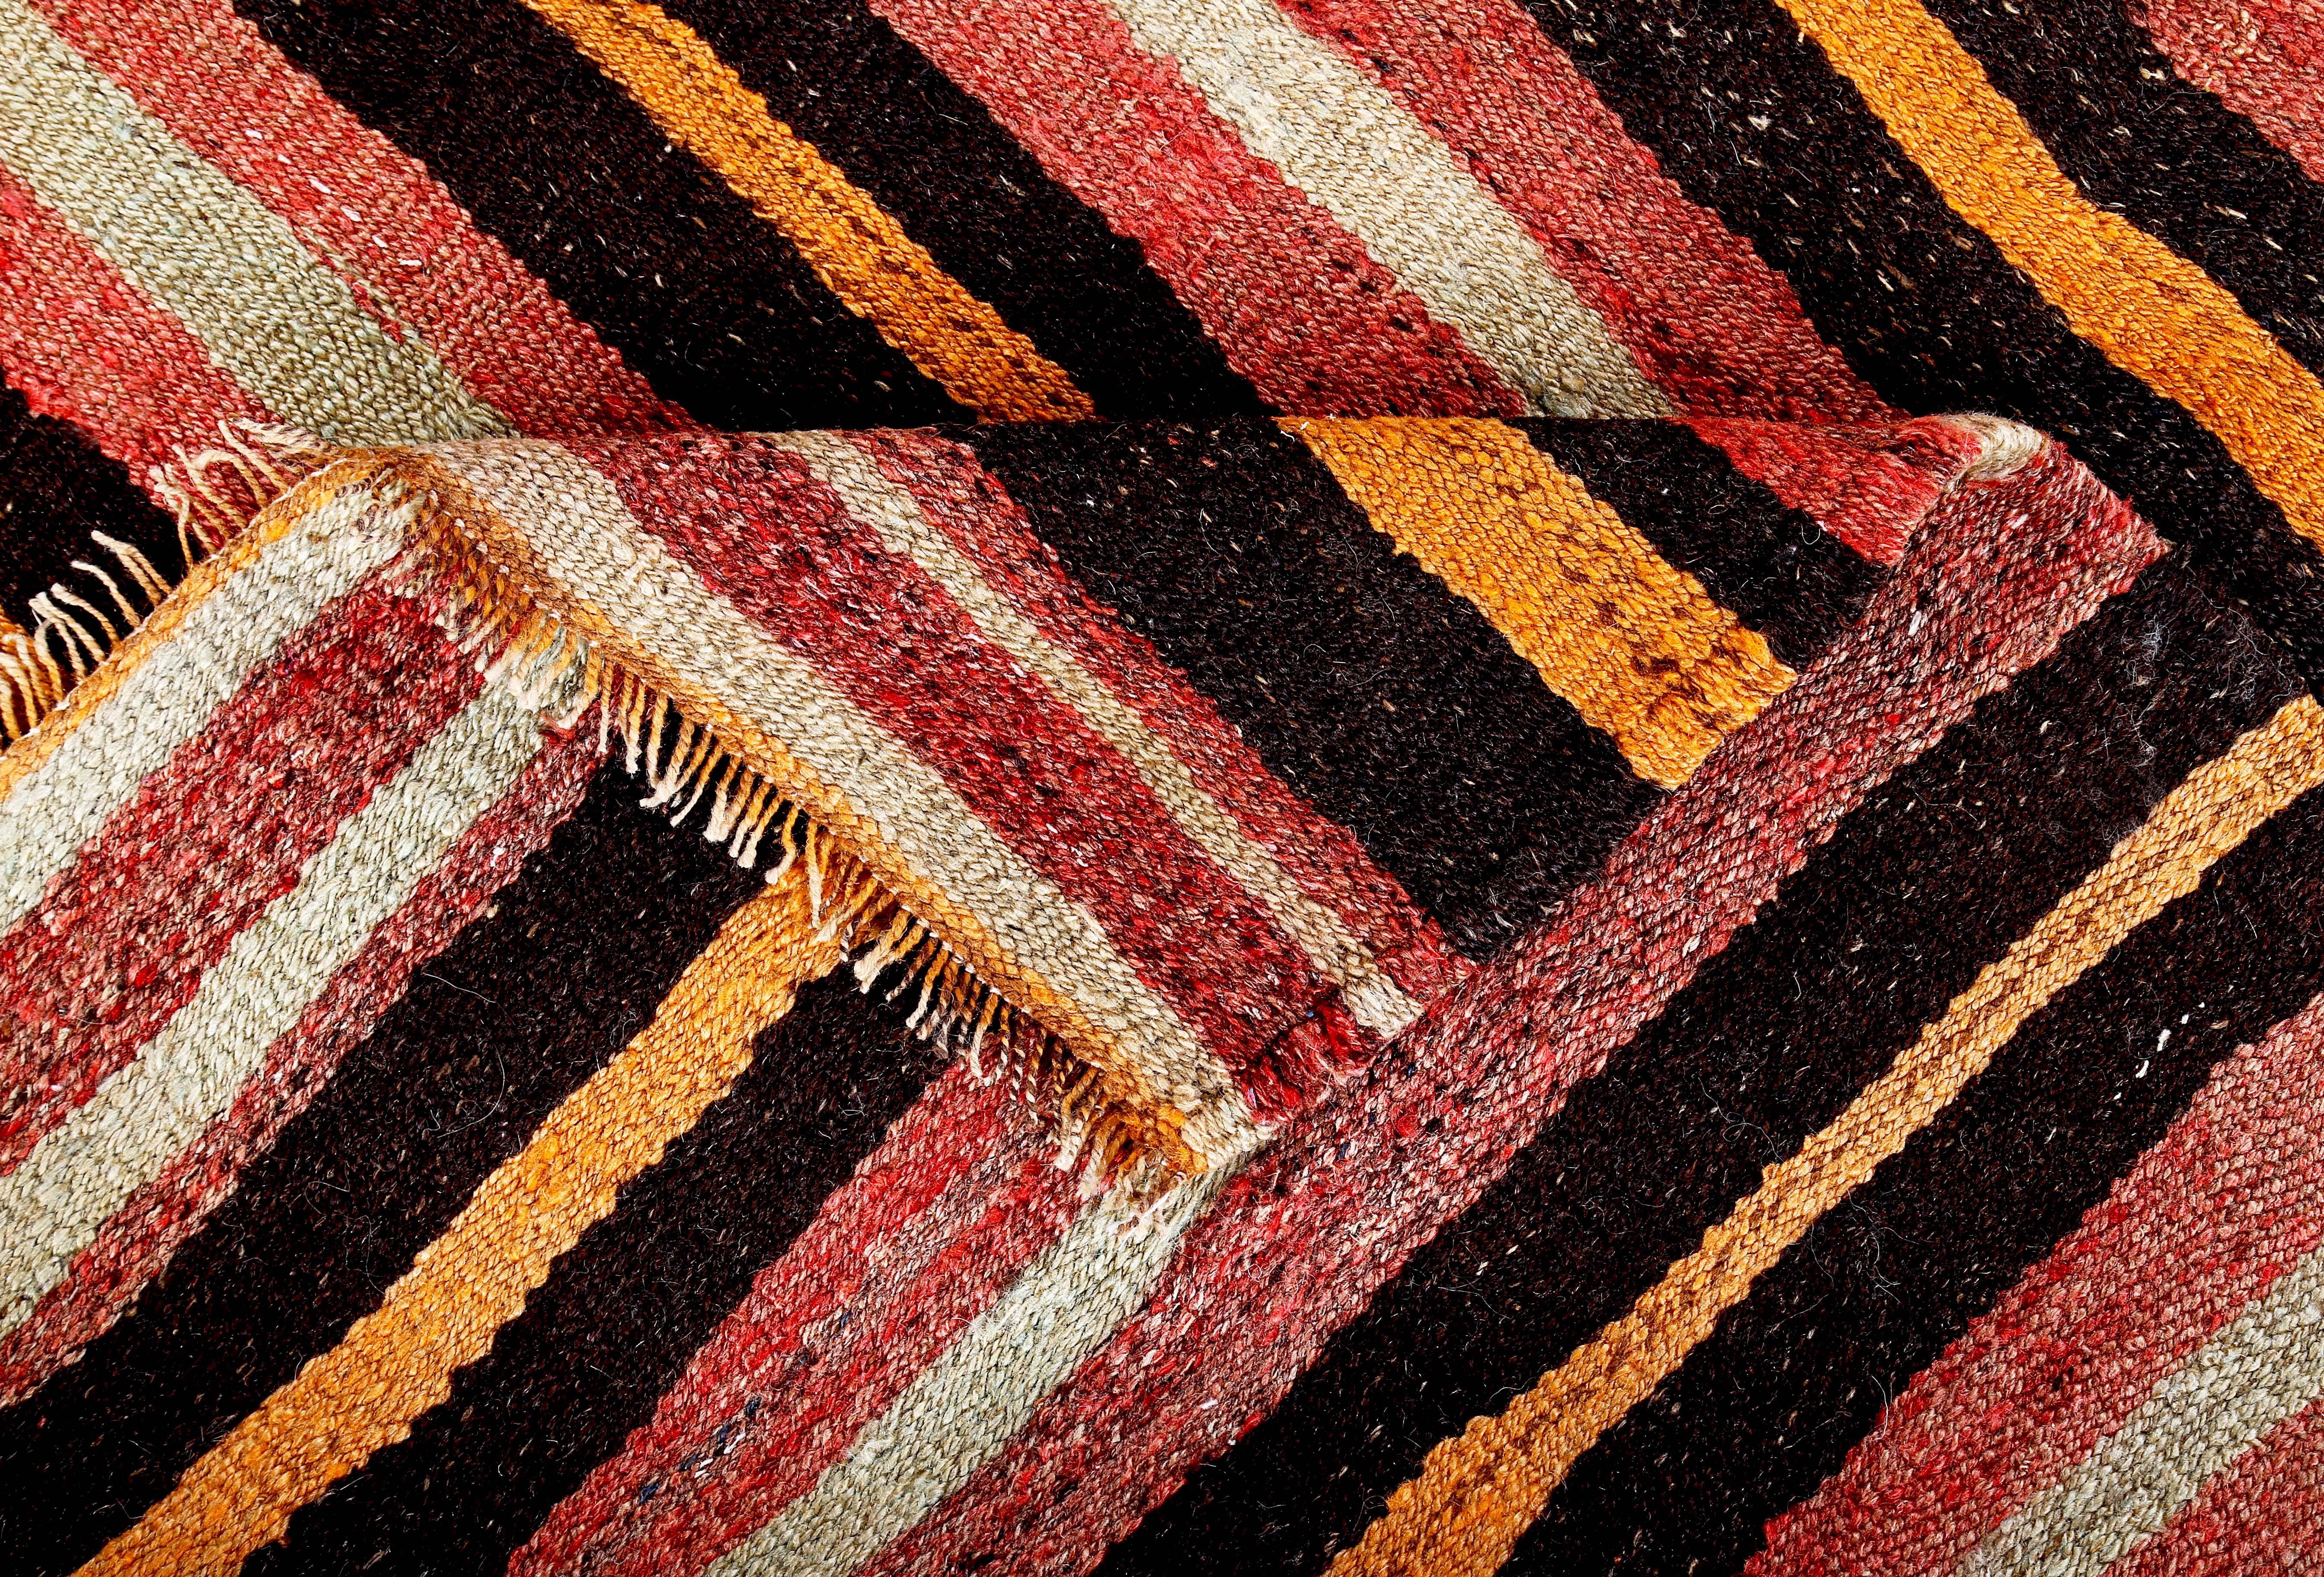 Hand-Woven Turkish Kilim Rug with Black and Orange Stripes on Red and Ivory Field For Sale